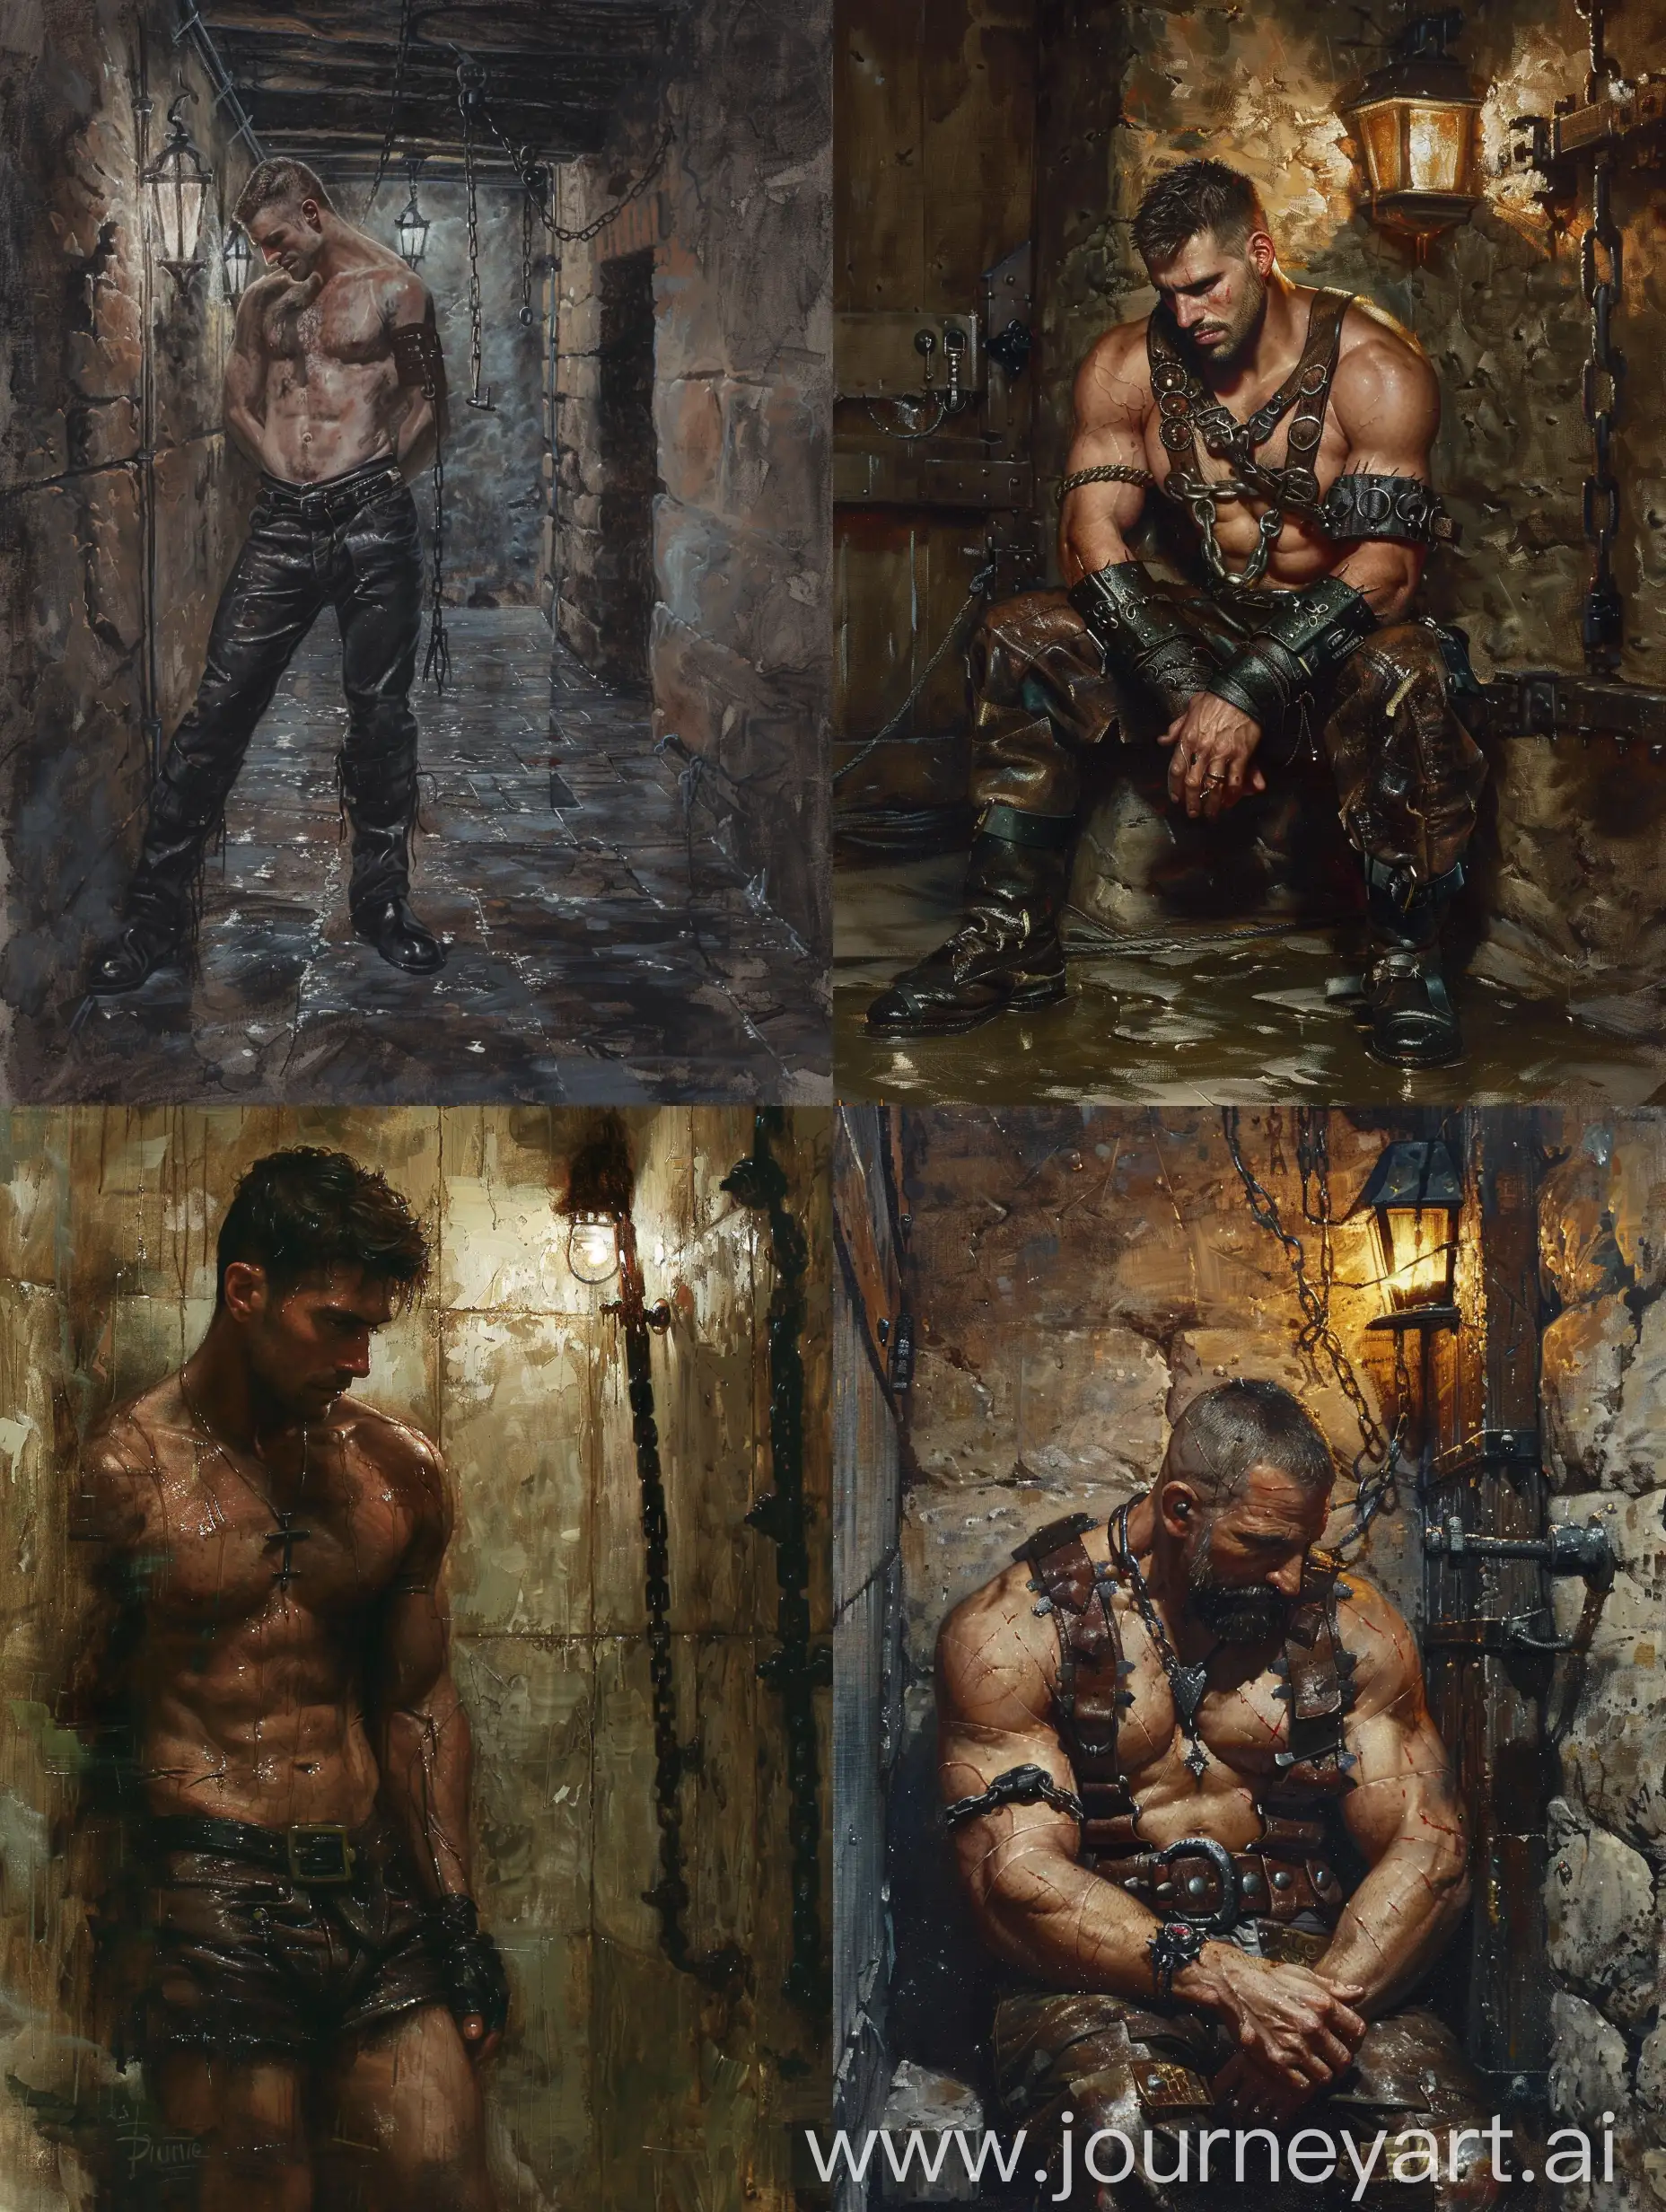 Chaotic-Dungeon-Pastorale-with-Realistic-Handsome-Man-in-Leather